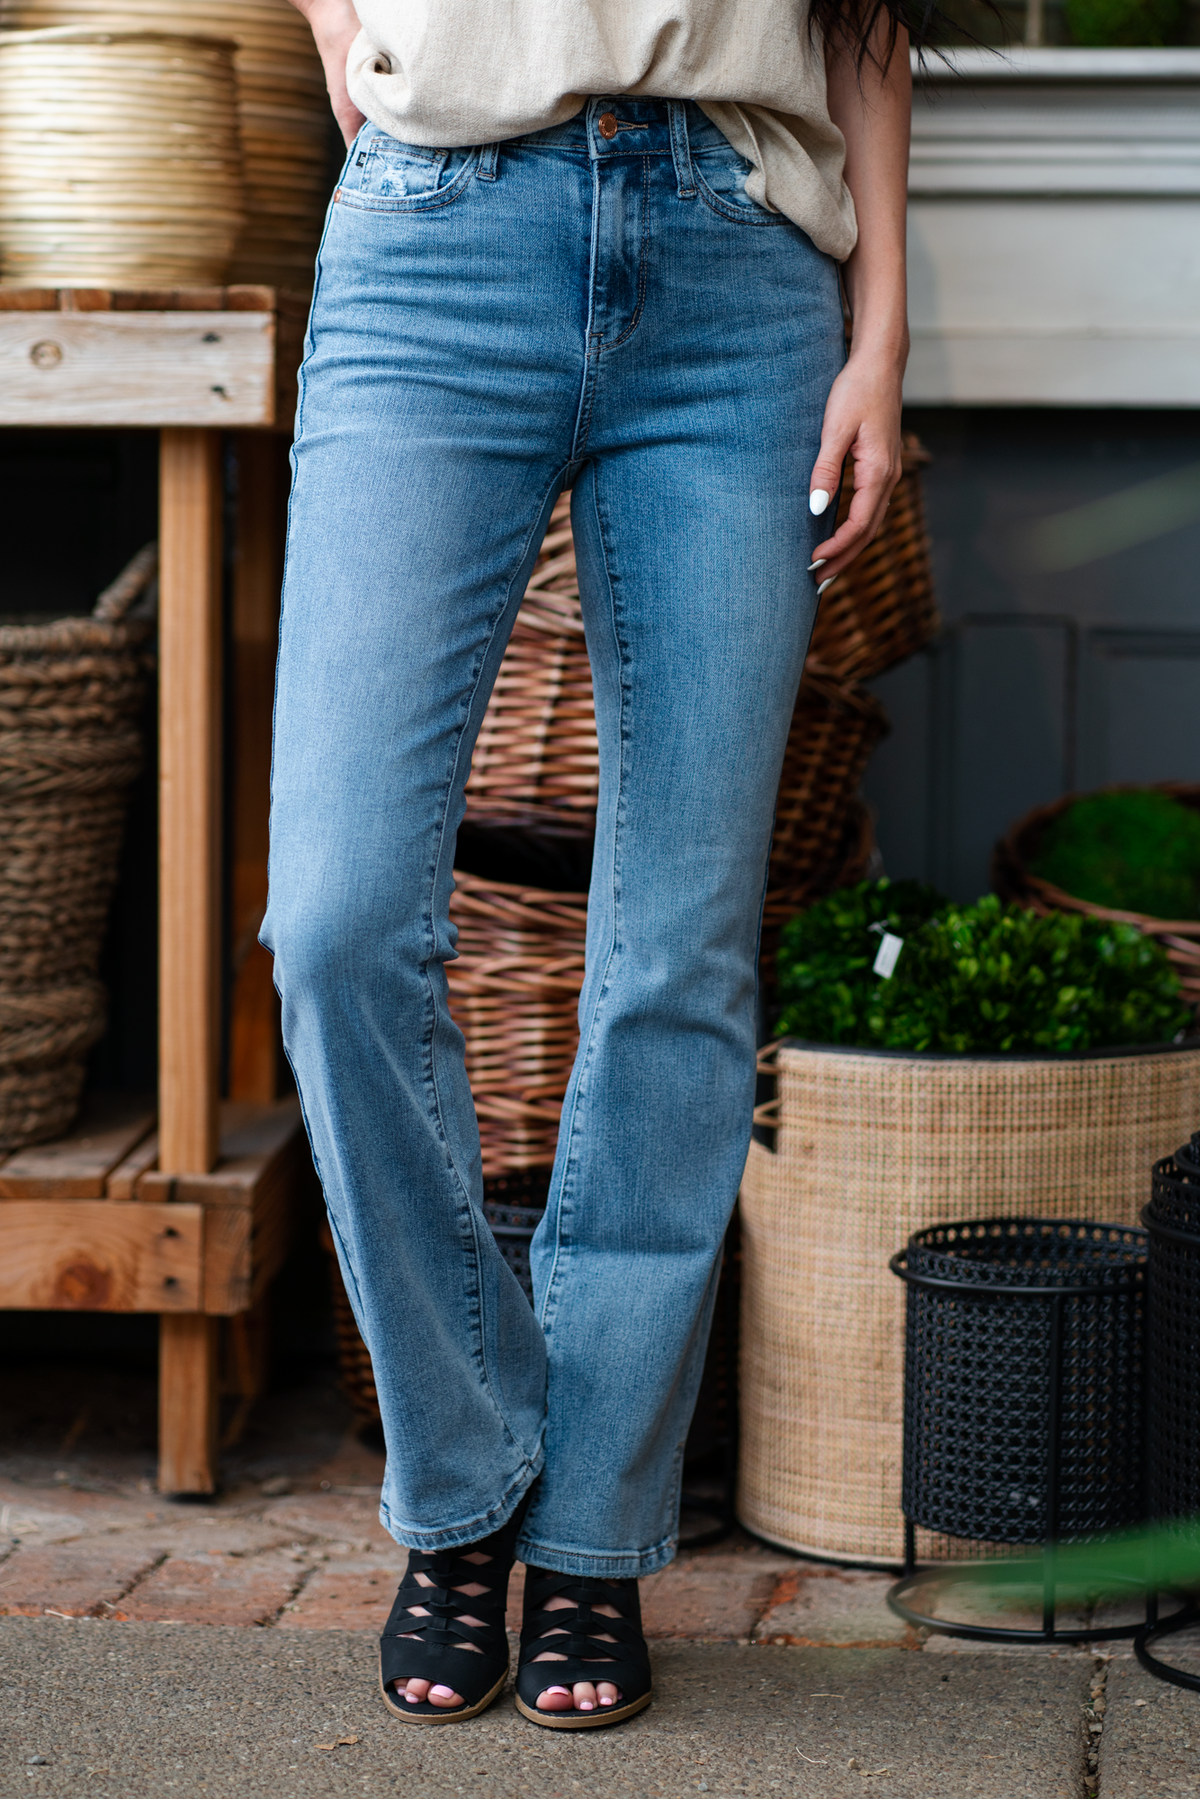 Judy Blue  Over your skinny jeans? The slim boot cuts will be your go to fit!  With a high-waist, they hit you at the right spot to tuck you in. Pair with some booties and a long sleeve henley for a cute and comfy look.   Color: Light Wash Cut: Boot Cut, 32" Inseam* Rise: High-Rise. 10.5" Front Rise* Material: 92% Cotton 6% Polyester 2% Spandex Machine Wash Separately In Cold Water Stitching: Classic Fly: Zipper Style #: JB88289 , 88289